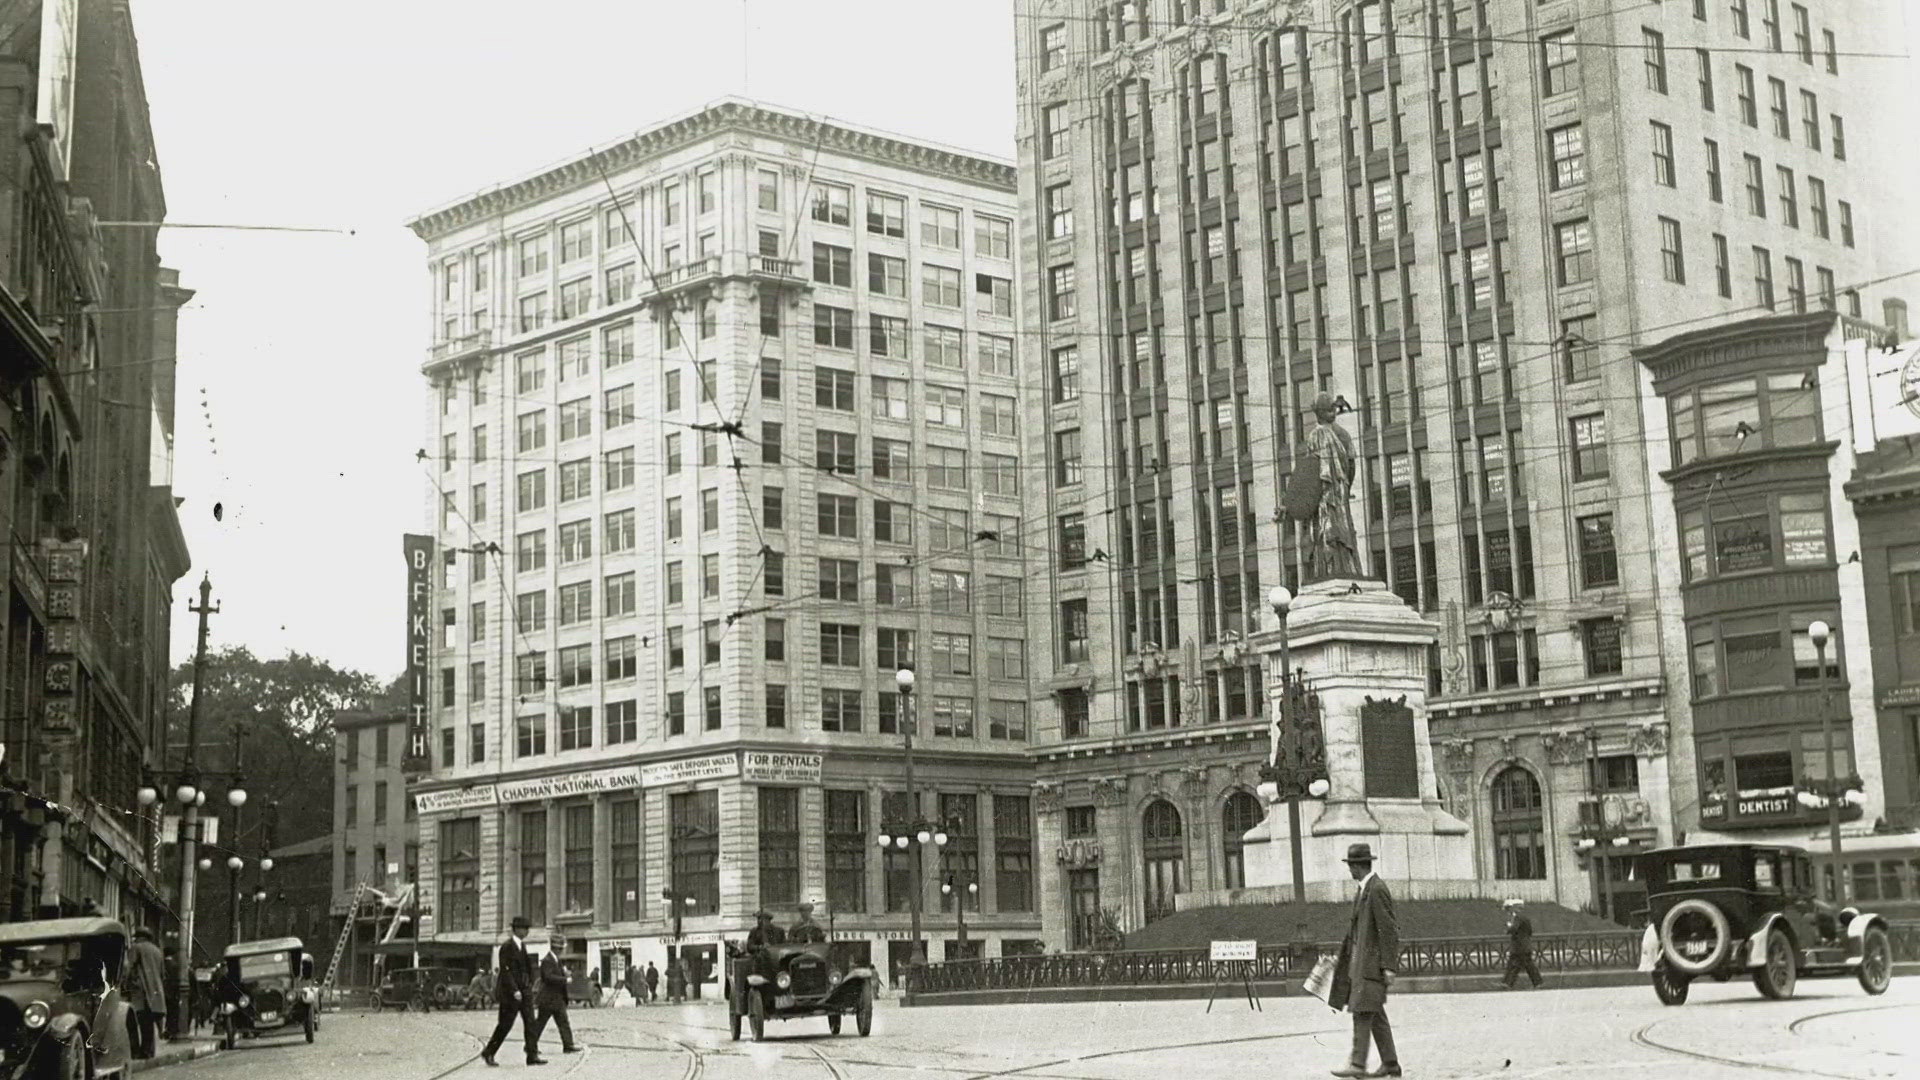 Vintage photos of Portland offer a trip back to a very different time and place.